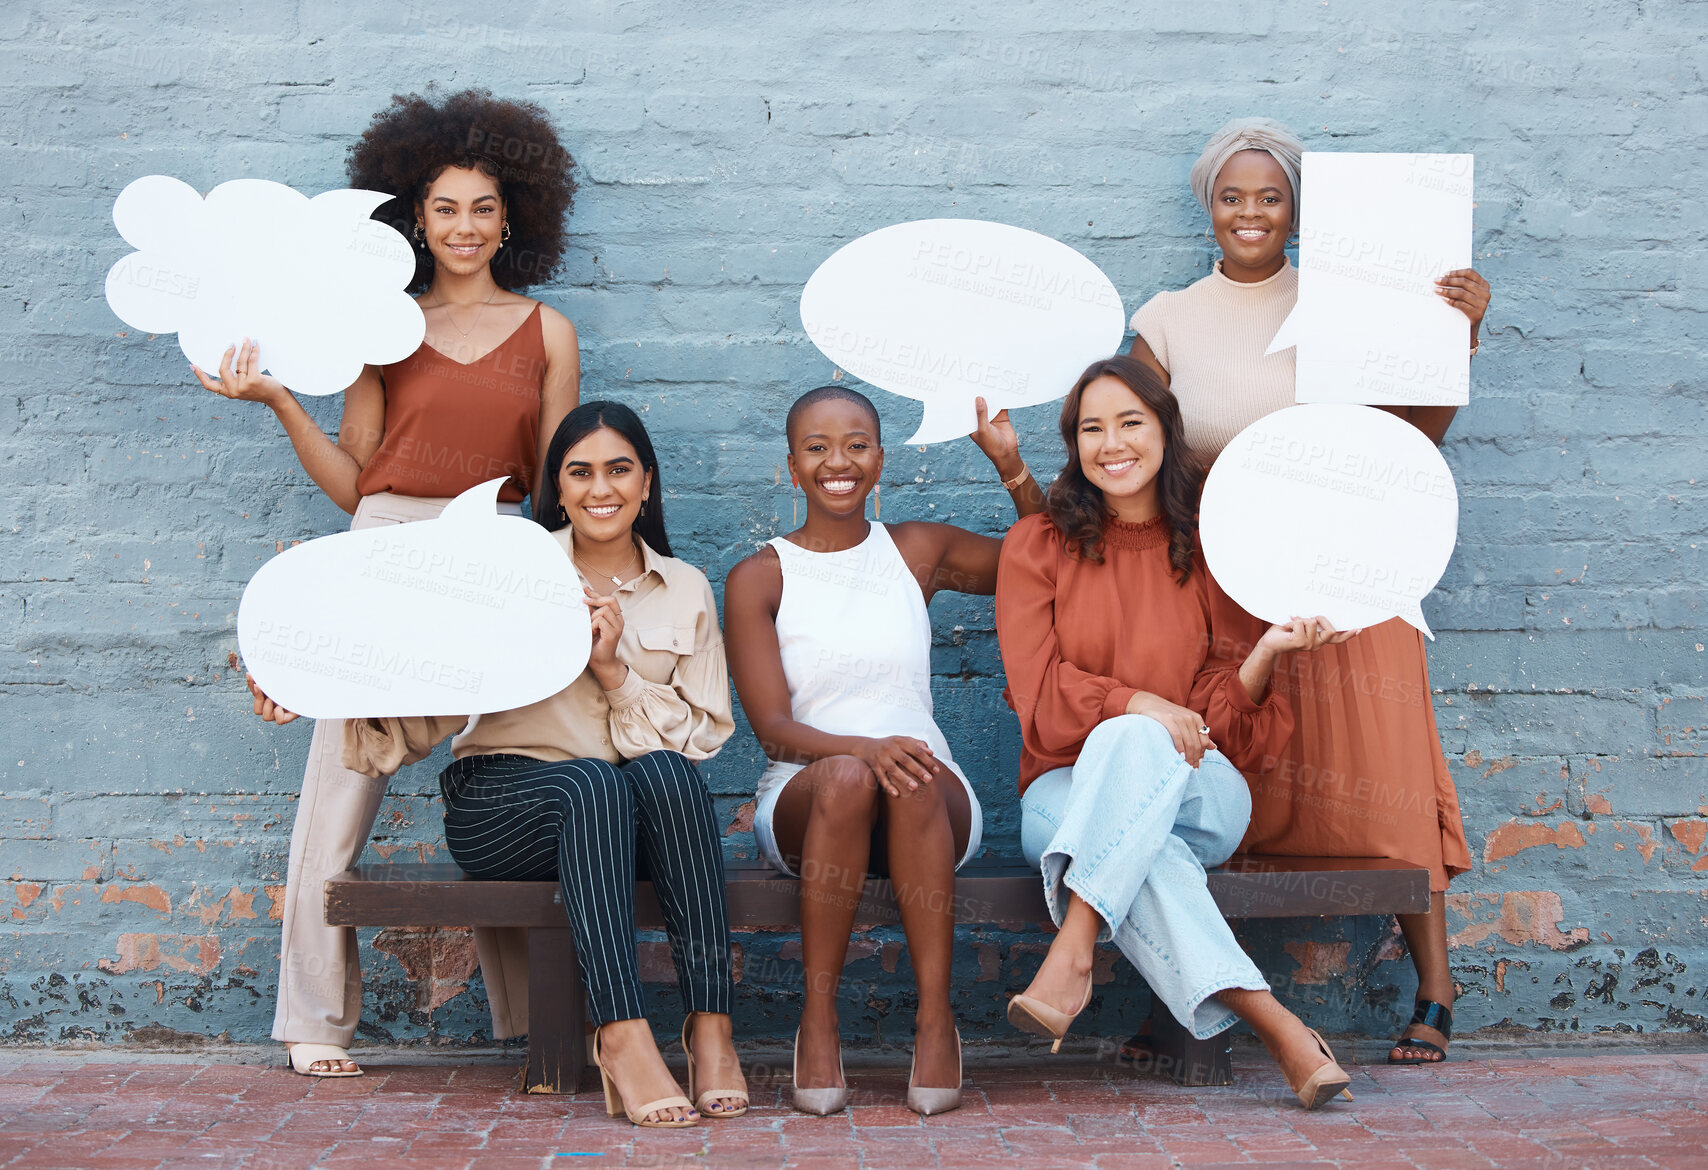 Buy stock photo Business woman, friends and speech bubble in social media holding shapes or icons against a wall background. Portrait of happy women smile with poster shaped symbols for networking or communication